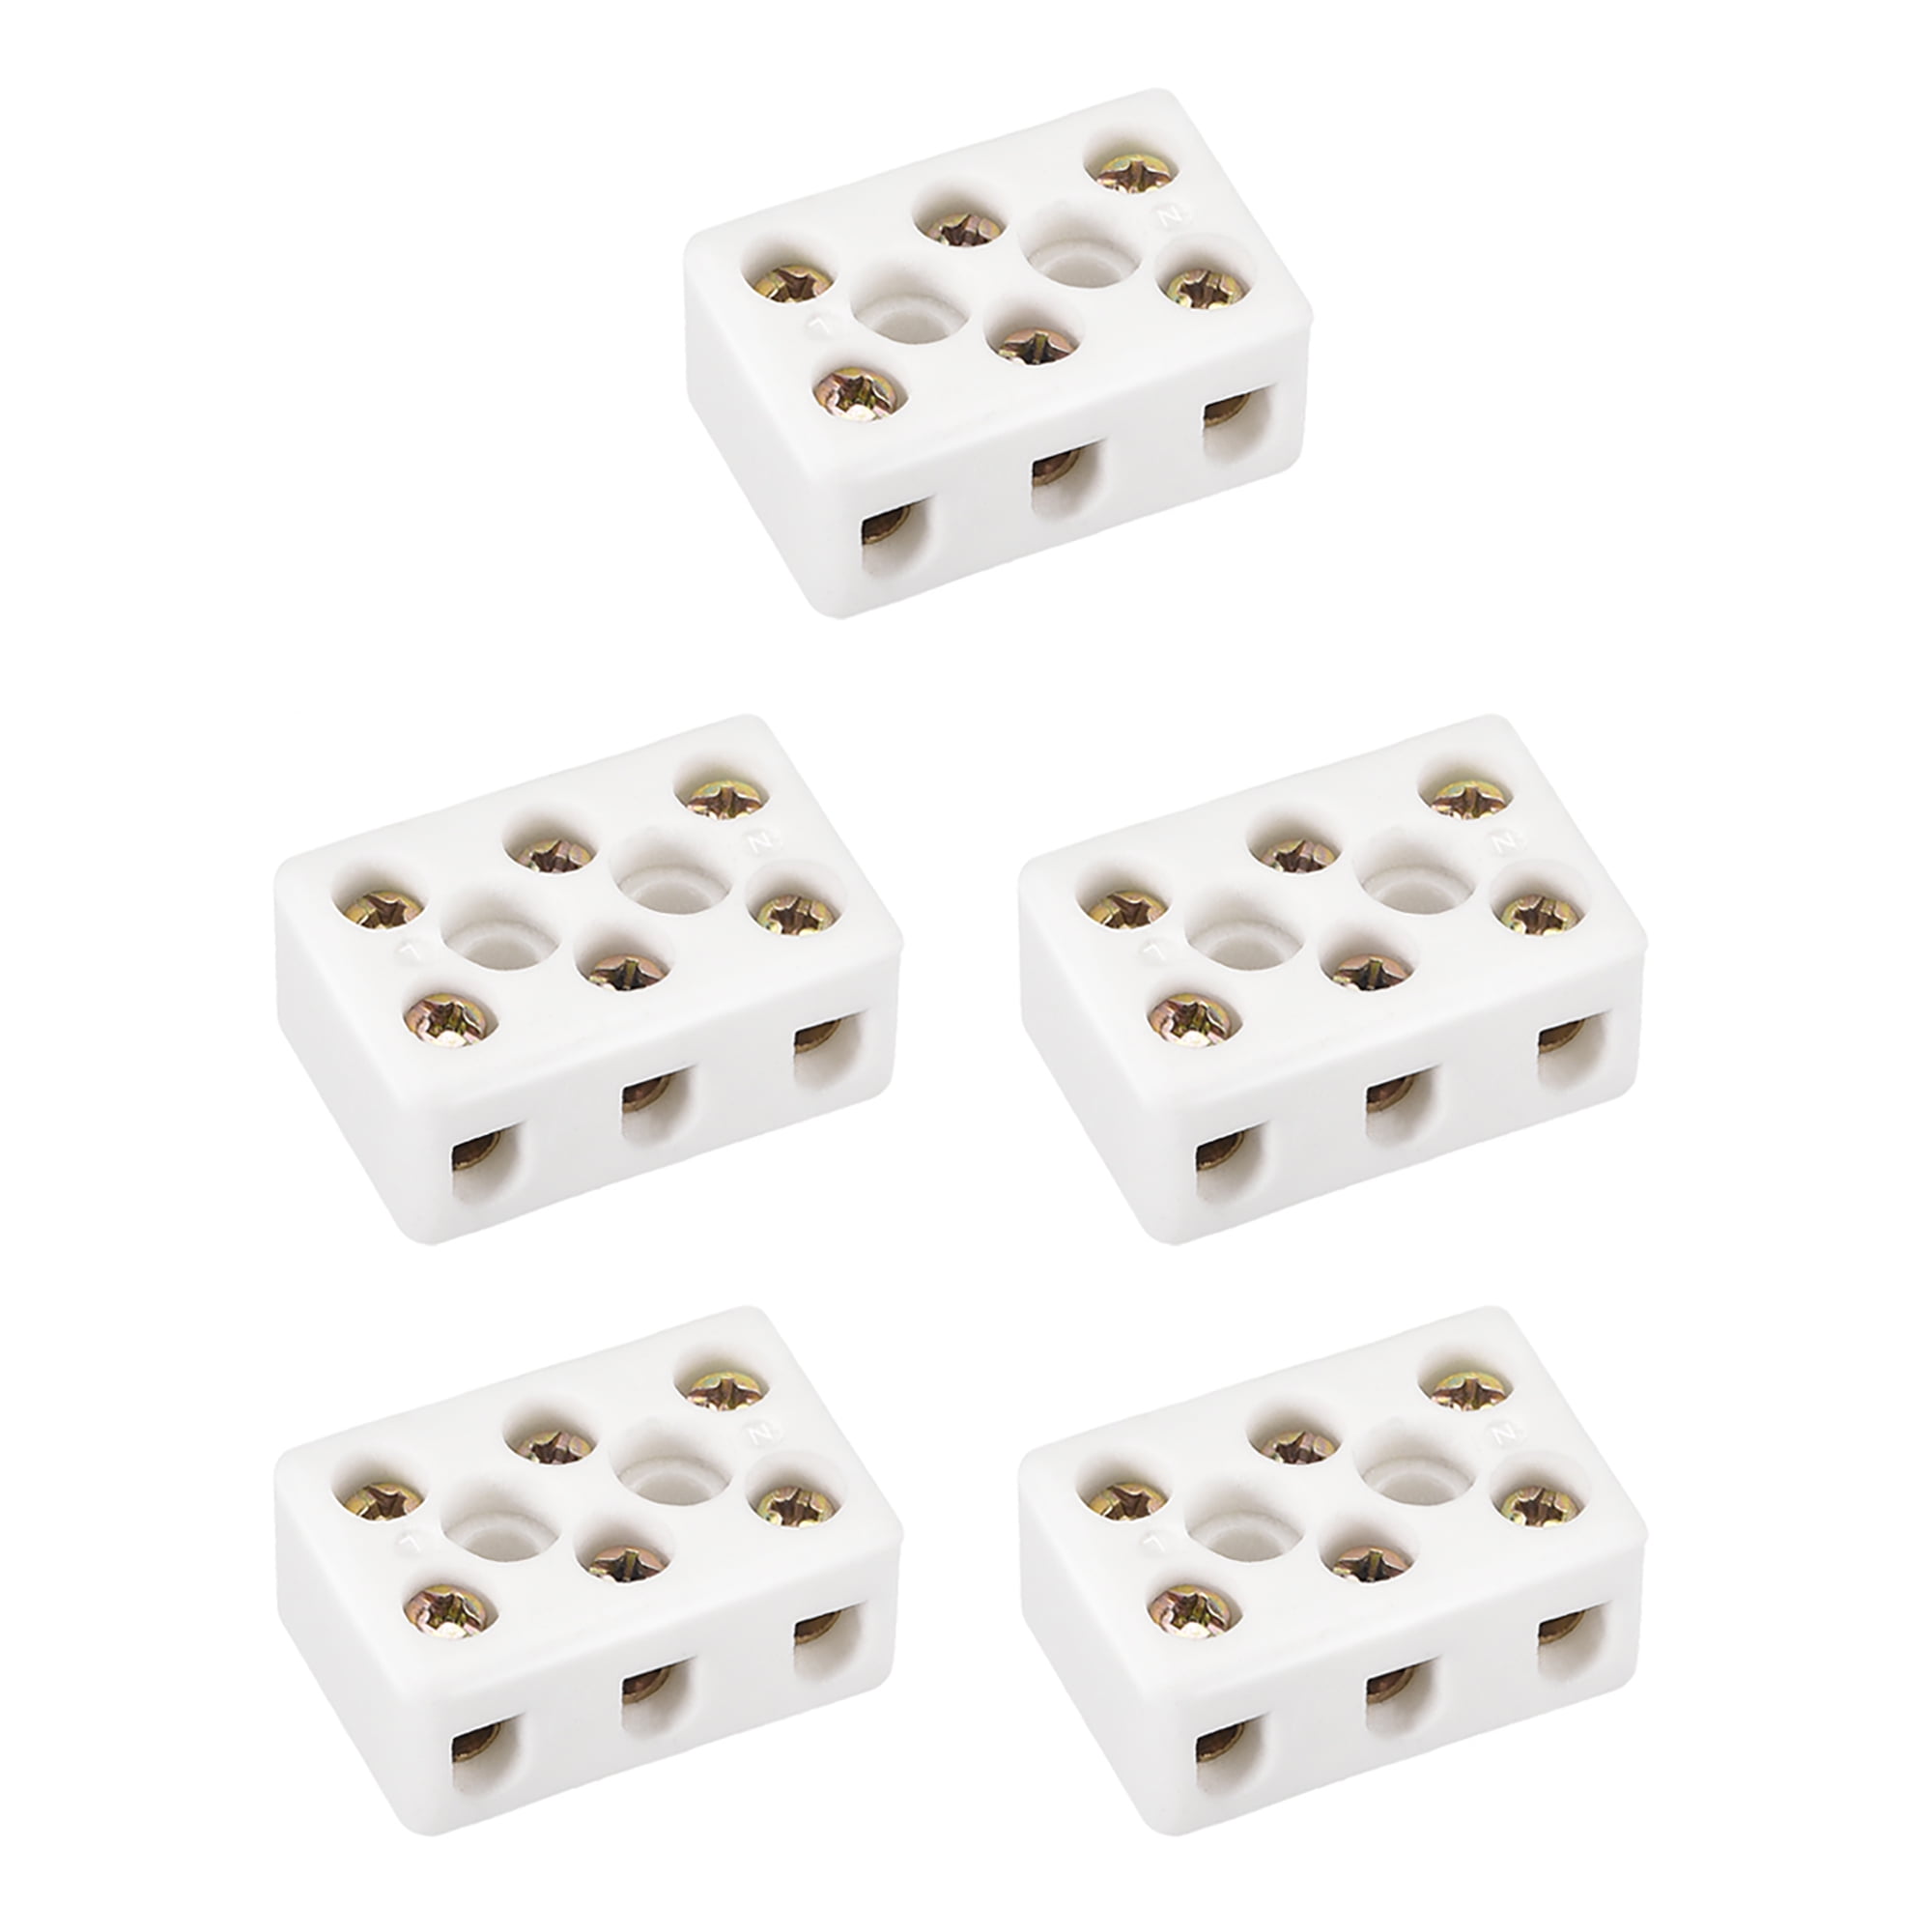 uxcell 3 Way Ceramics Terminal Blocks High Temp Porcelain Ceramic Connectors 47x27.5x19.5mm for Electrical Wire Cable 2 Pcs 